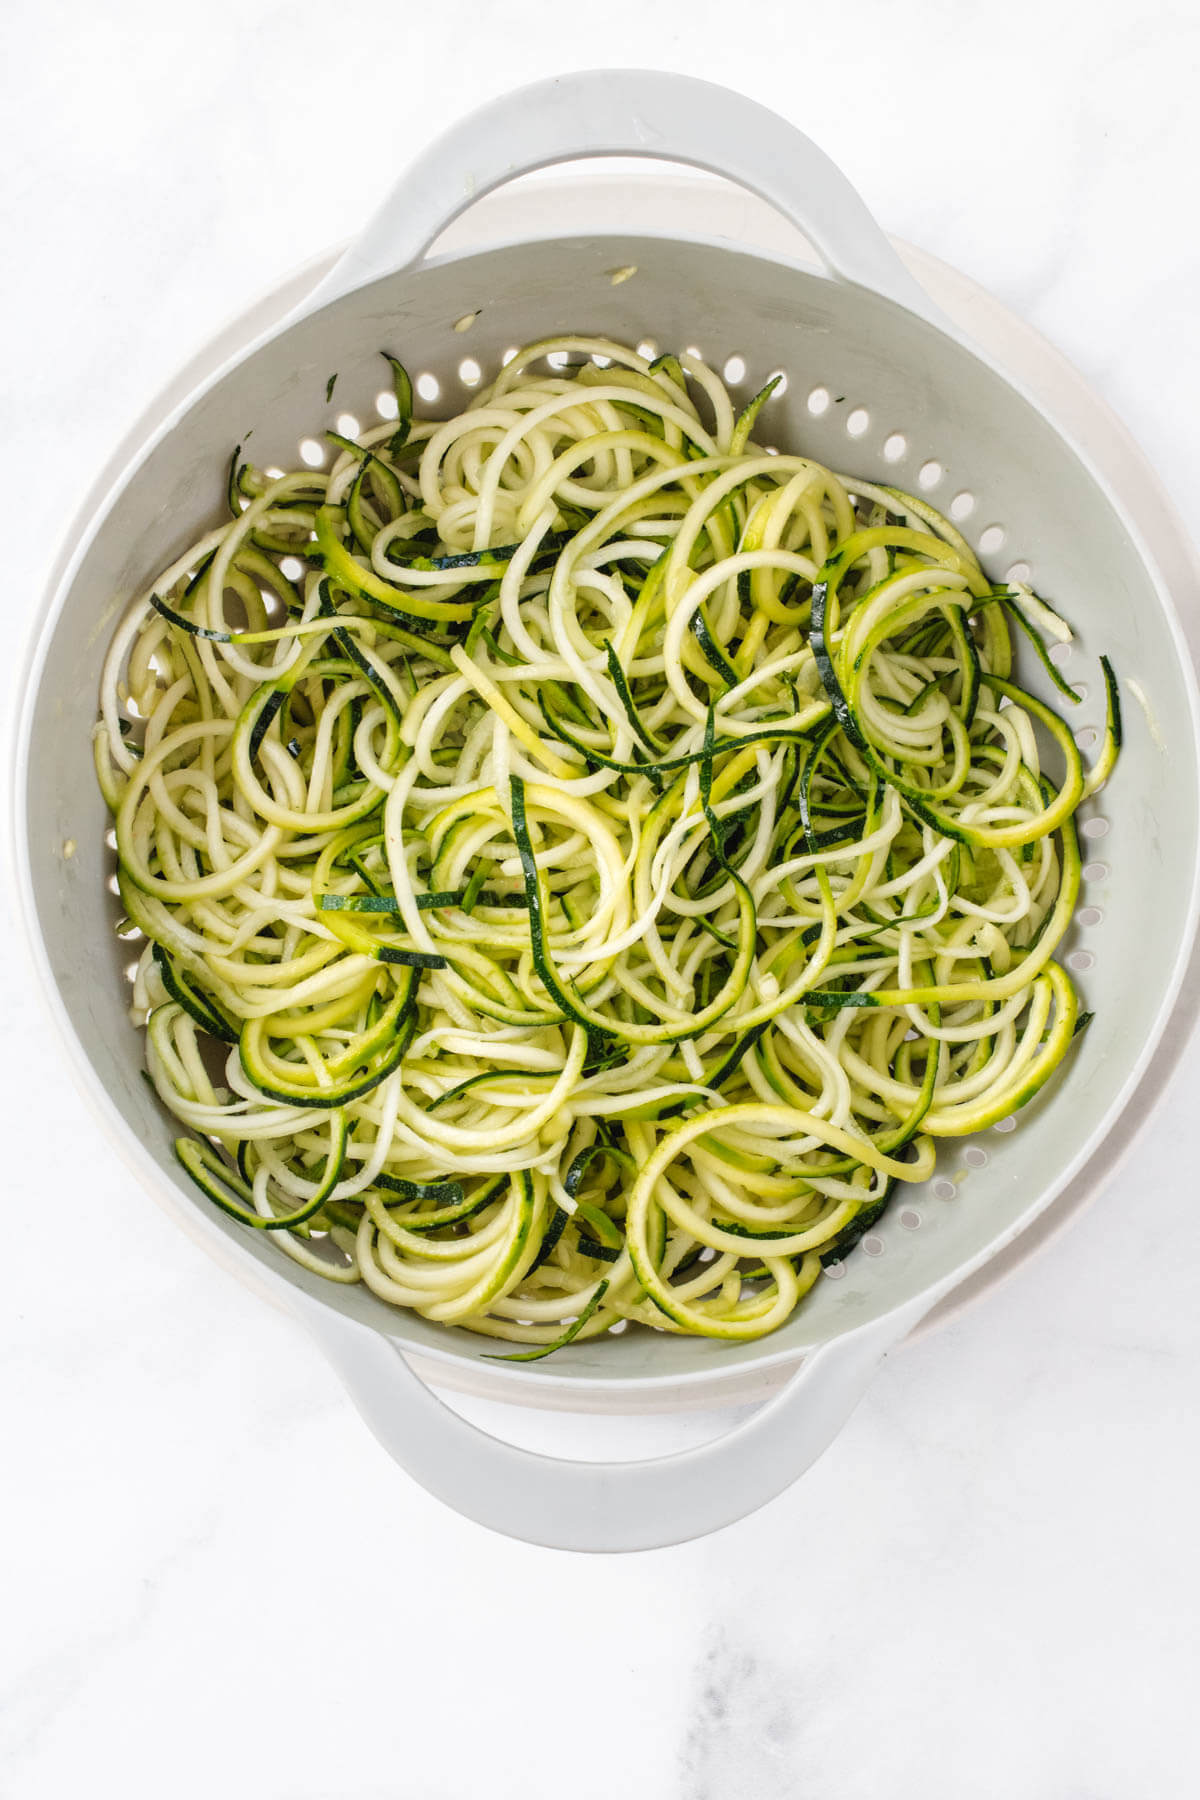 Zucchini noodles in a strainer.